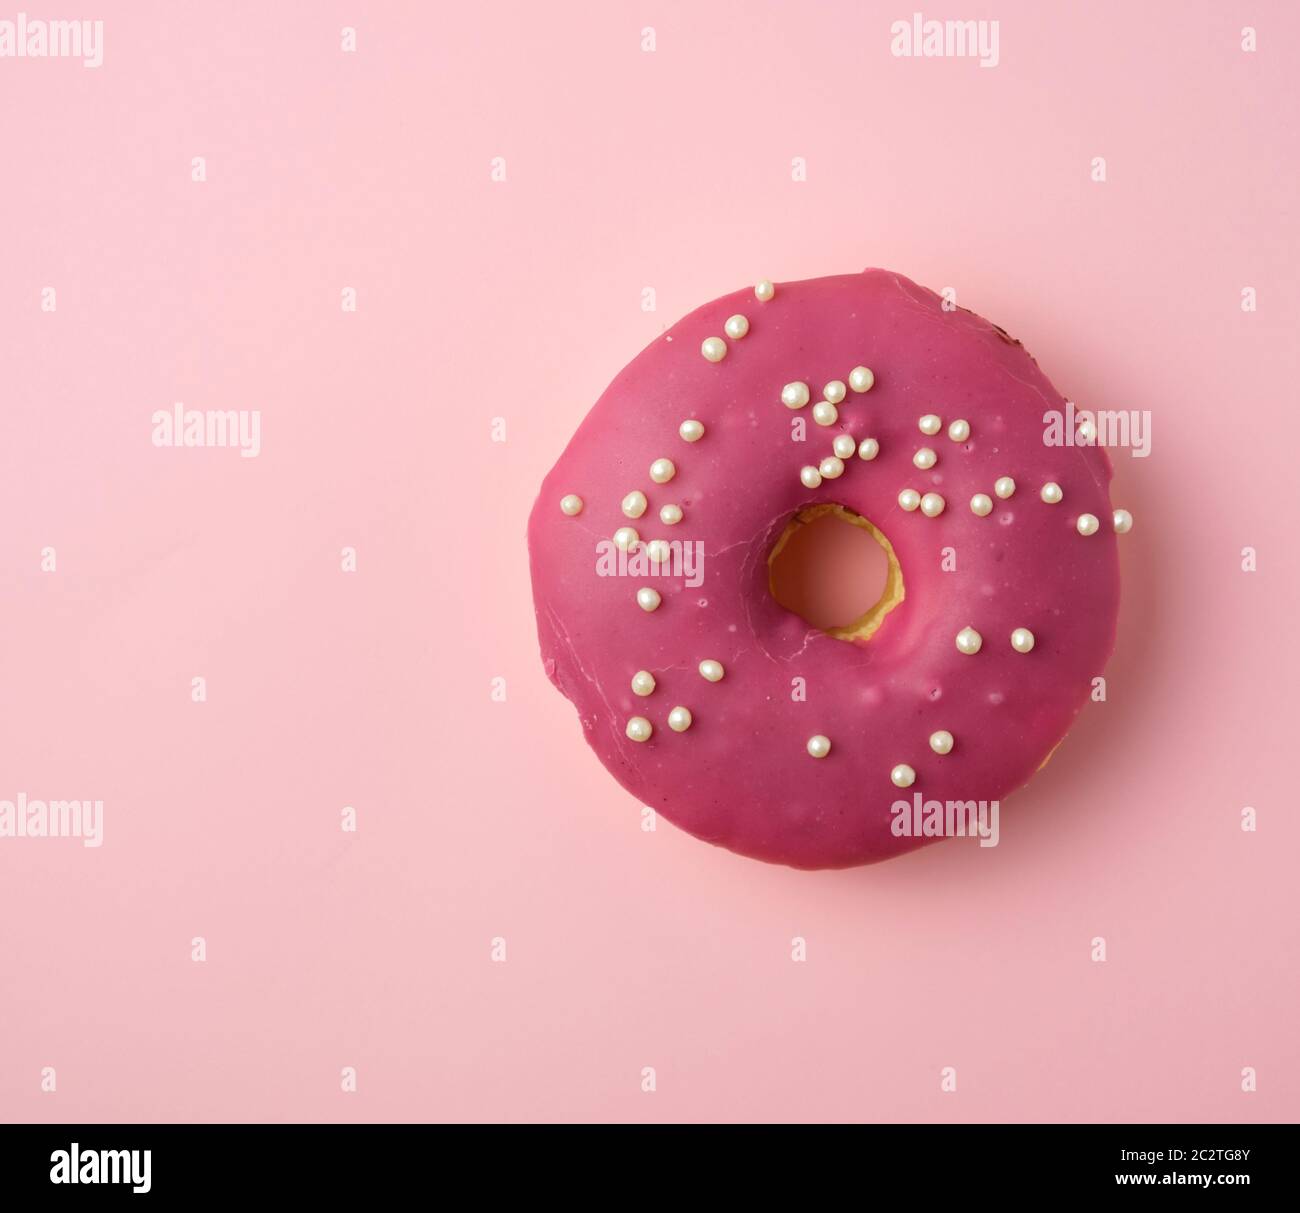 red round donut with white sprinkles on a pink background, top view Stock Photo